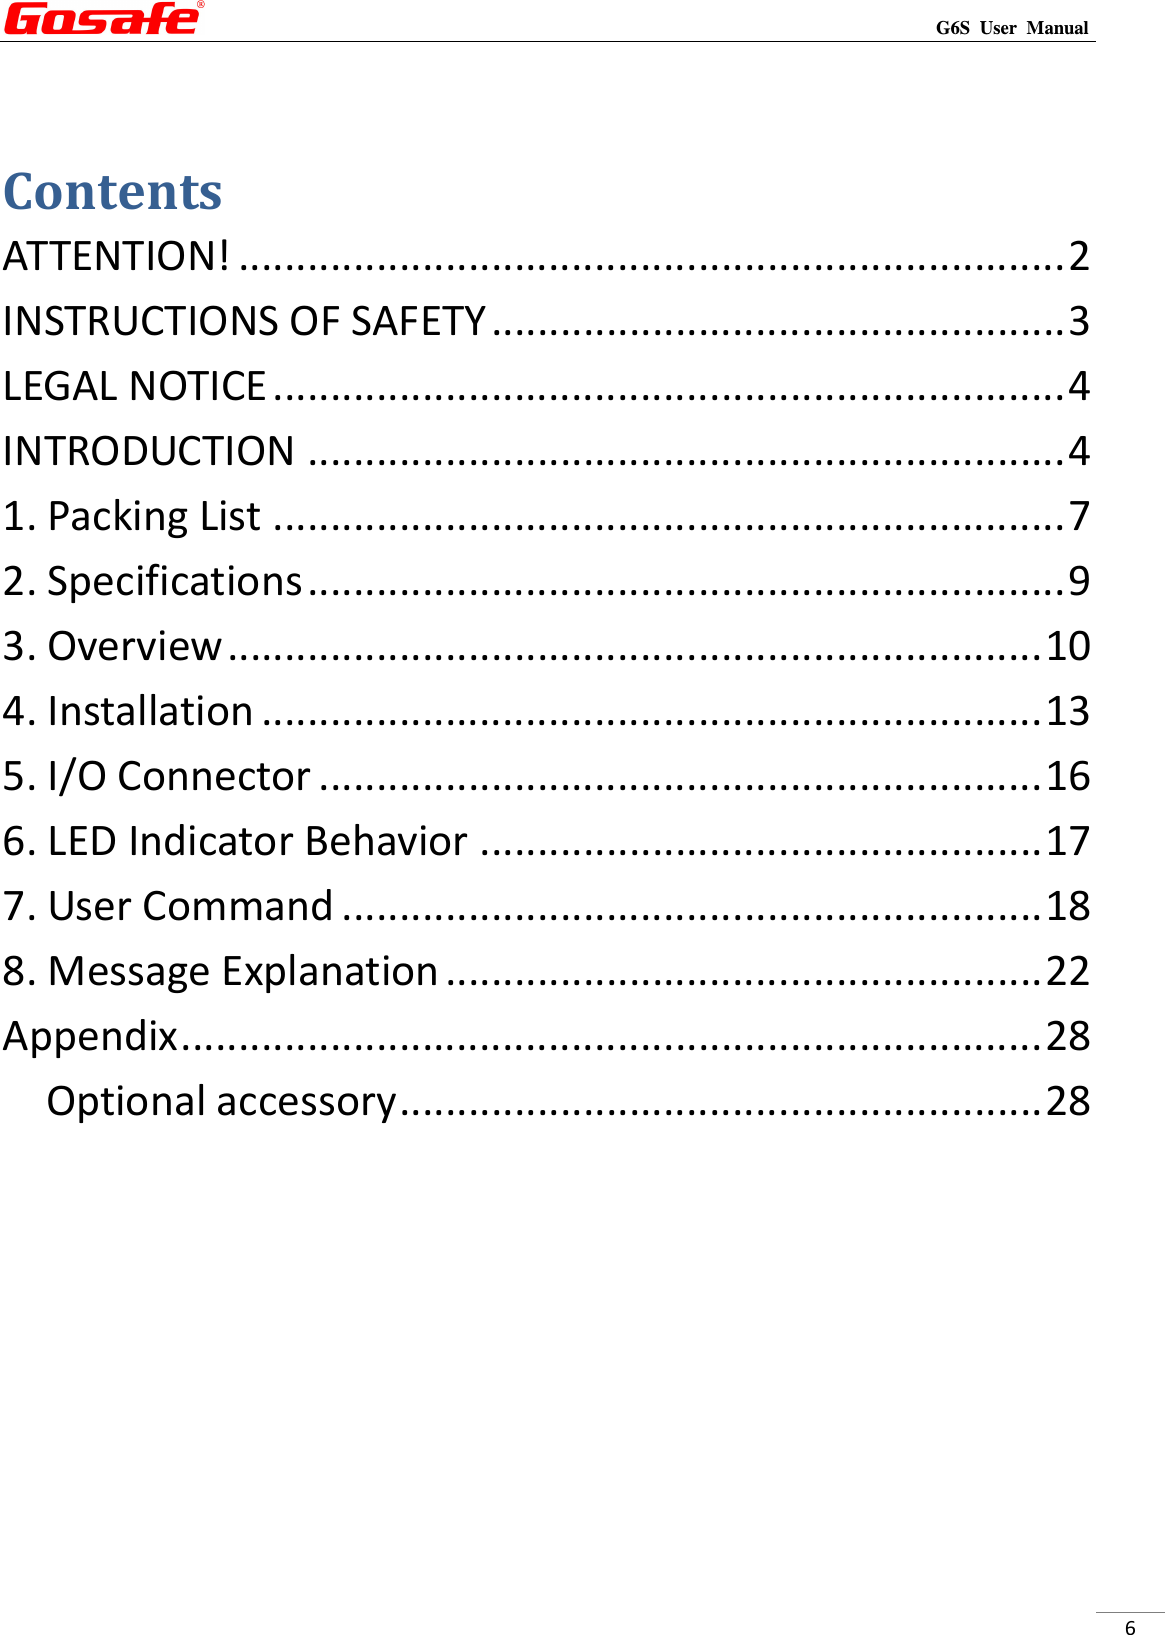                                                                                                                                                             G6S  User  Manual  6  Contents ATTENTION! ........................................................................ 2 INSTRUCTIONS OF SAFETY .................................................. 3 LEGAL NOTICE ..................................................................... 4 INTRODUCTION .................................................................. 4 1. Packing List ..................................................................... 7 2. Specifications .................................................................. 9 3. Overview ....................................................................... 10 4. Installation .................................................................... 13 5. I/O Connector ............................................................... 16 6. LED Indicator Behavior ................................................. 17 7. User Command ............................................................. 18 8. Message Explanation .................................................... 22 Appendix ........................................................................... 28 Optional accessory ........................................................ 28        